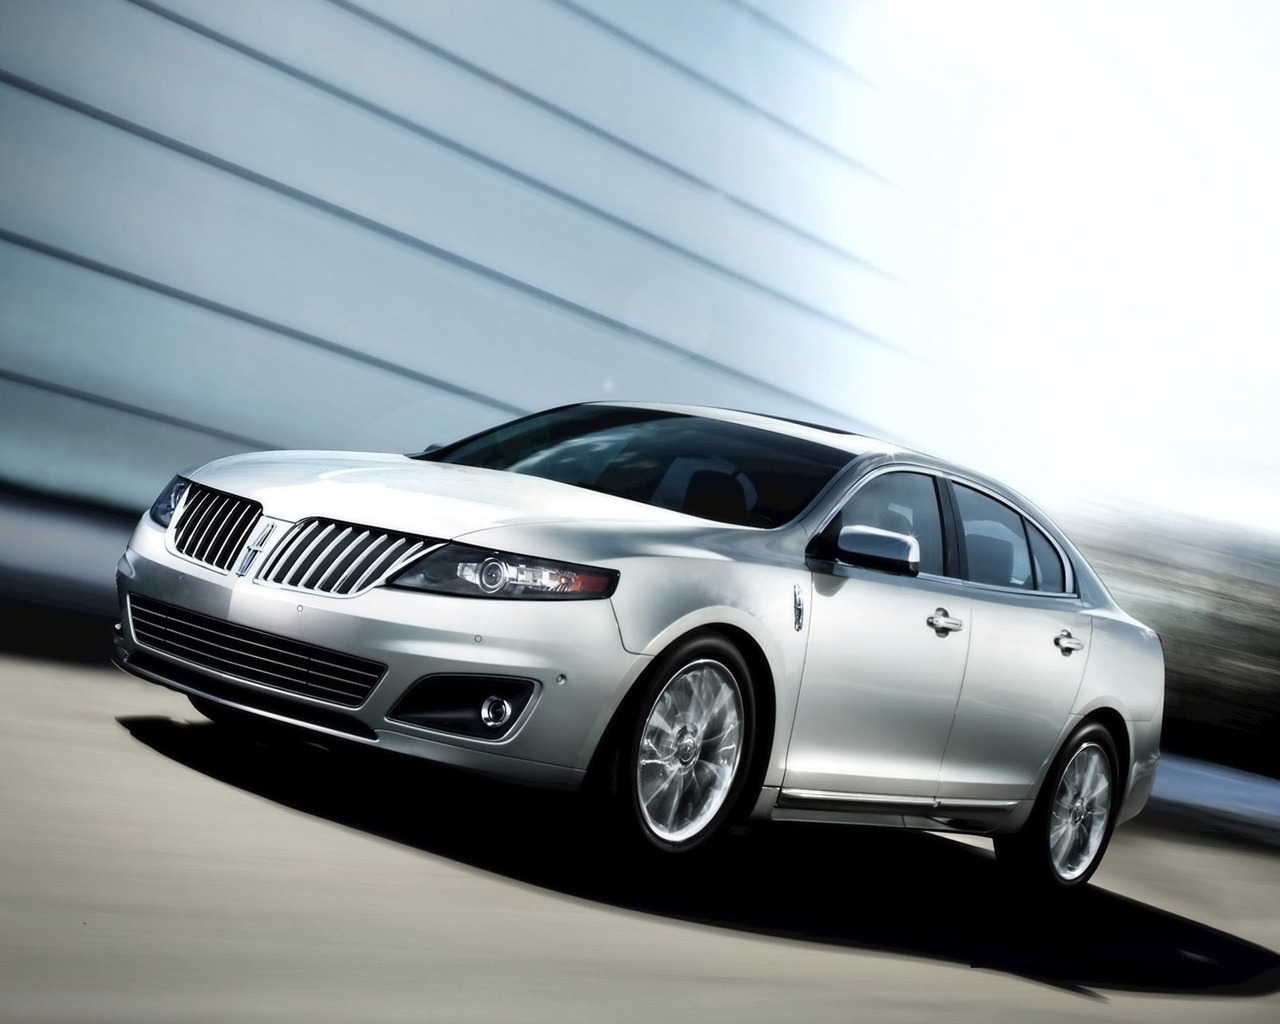 Lincoln MKS 2011 Silver for 1280 x 1024 resolution